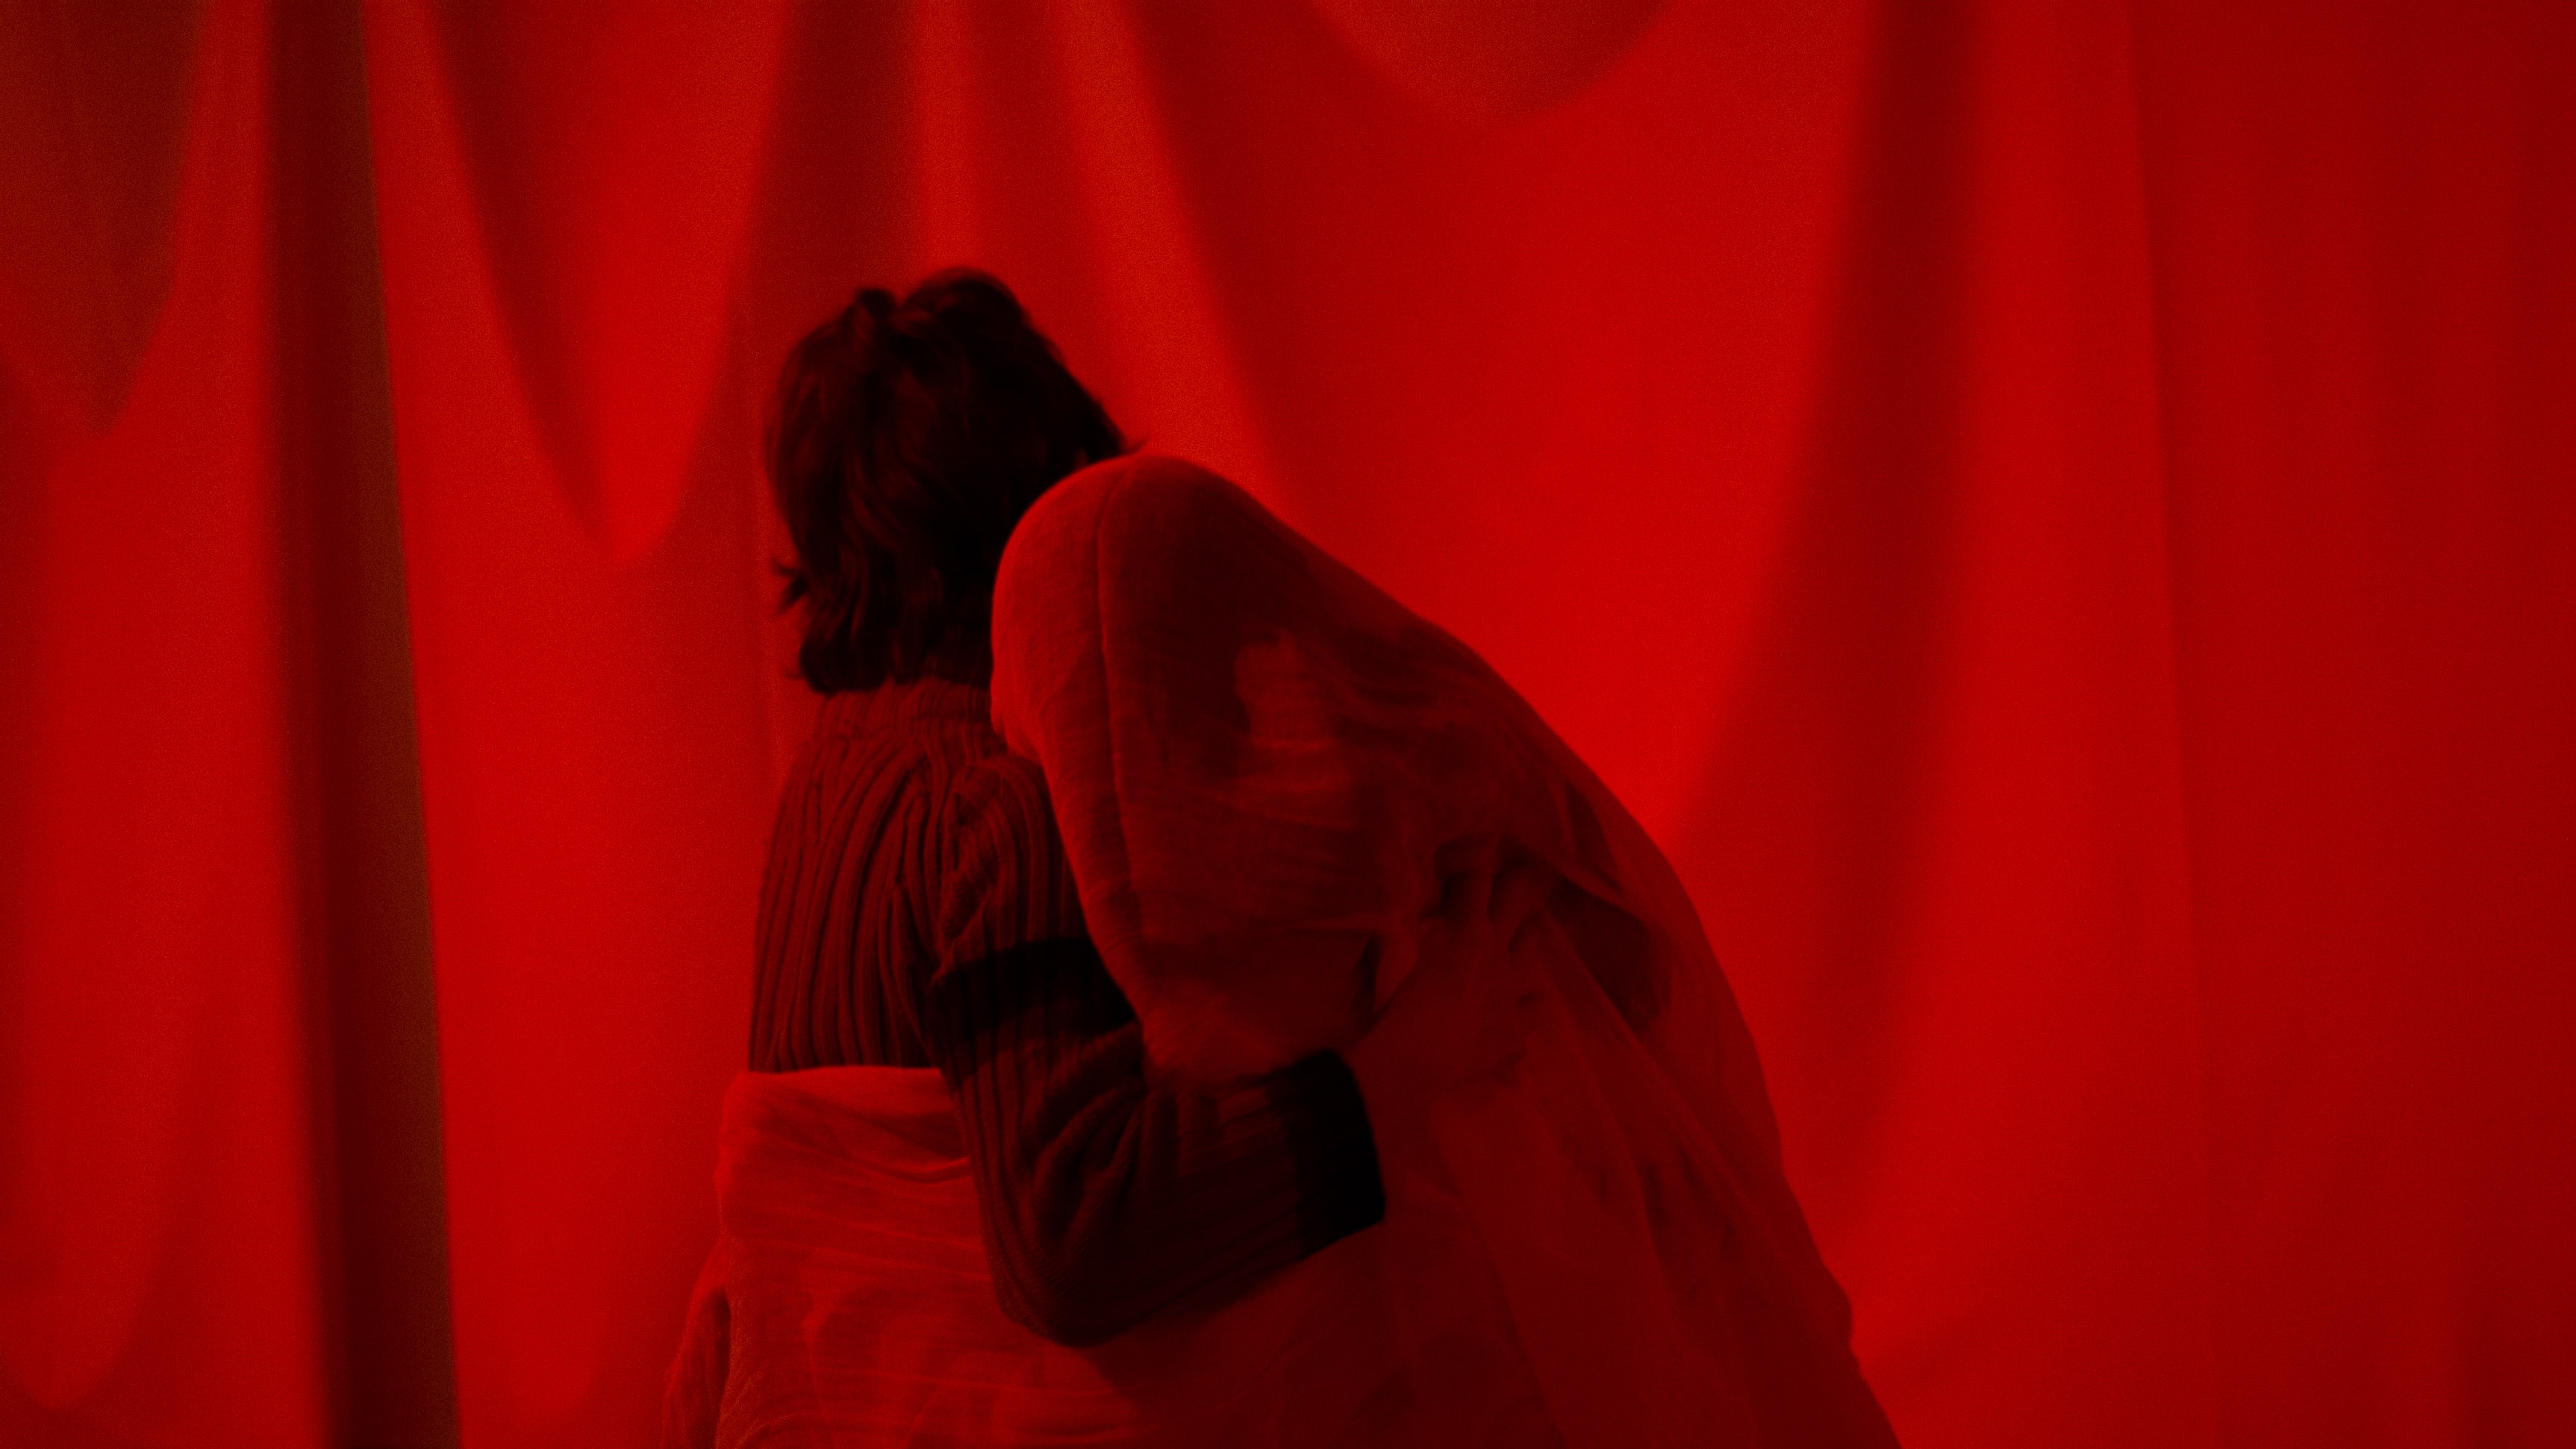 A person and a figure embrace each other in an all red room.